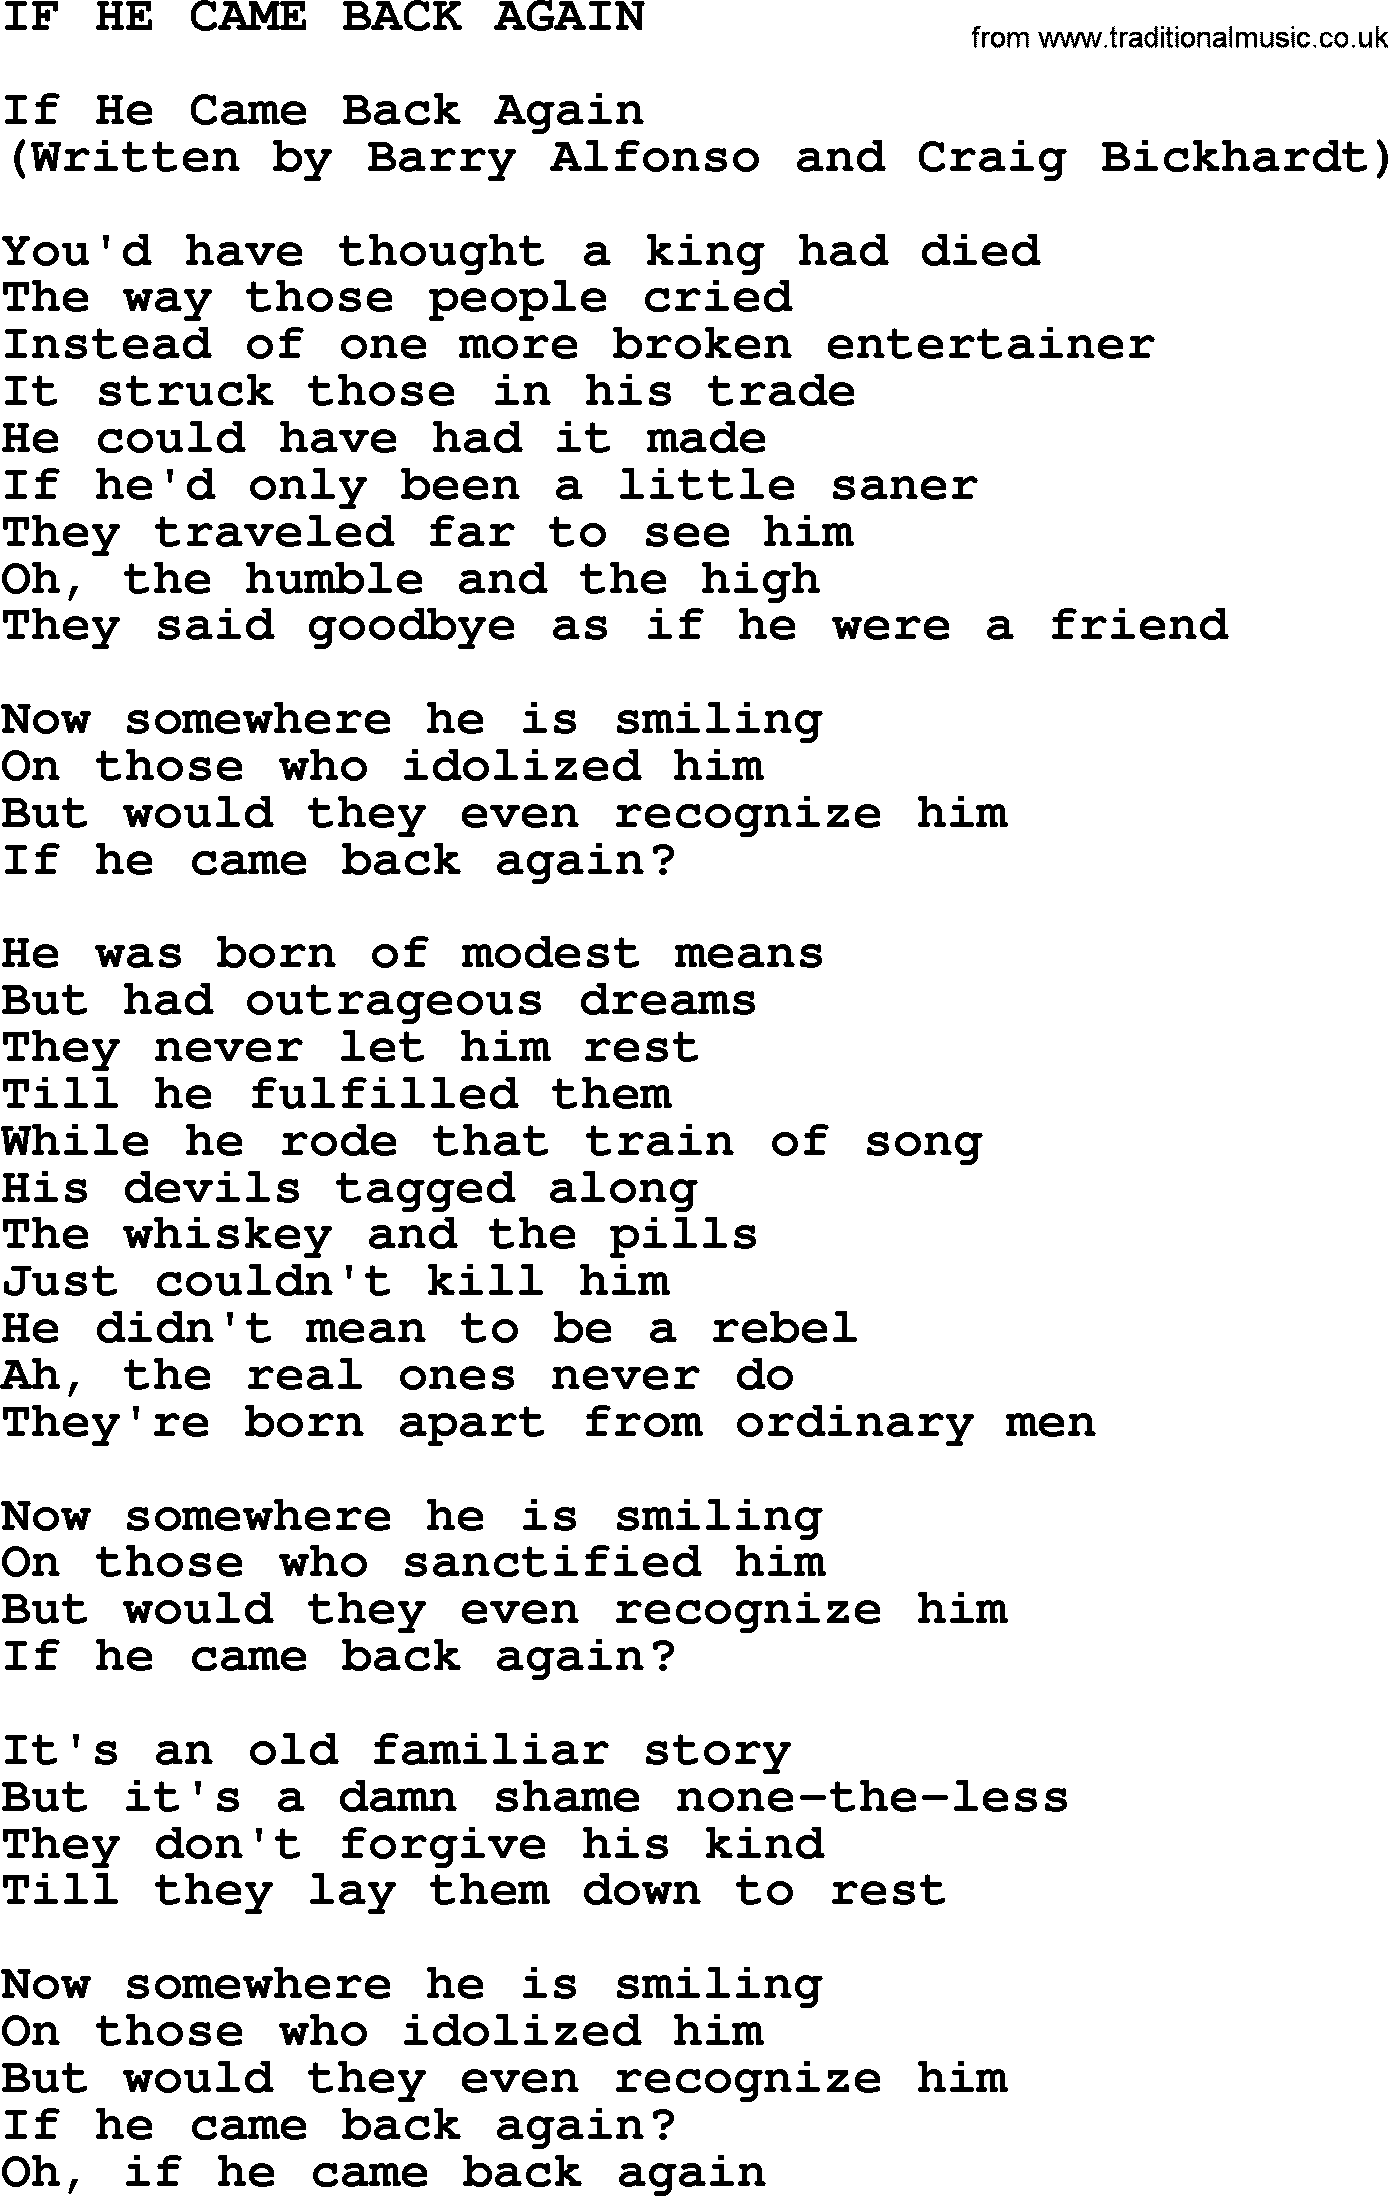 Johnny Cash song If He Came Back Again.txt lyrics